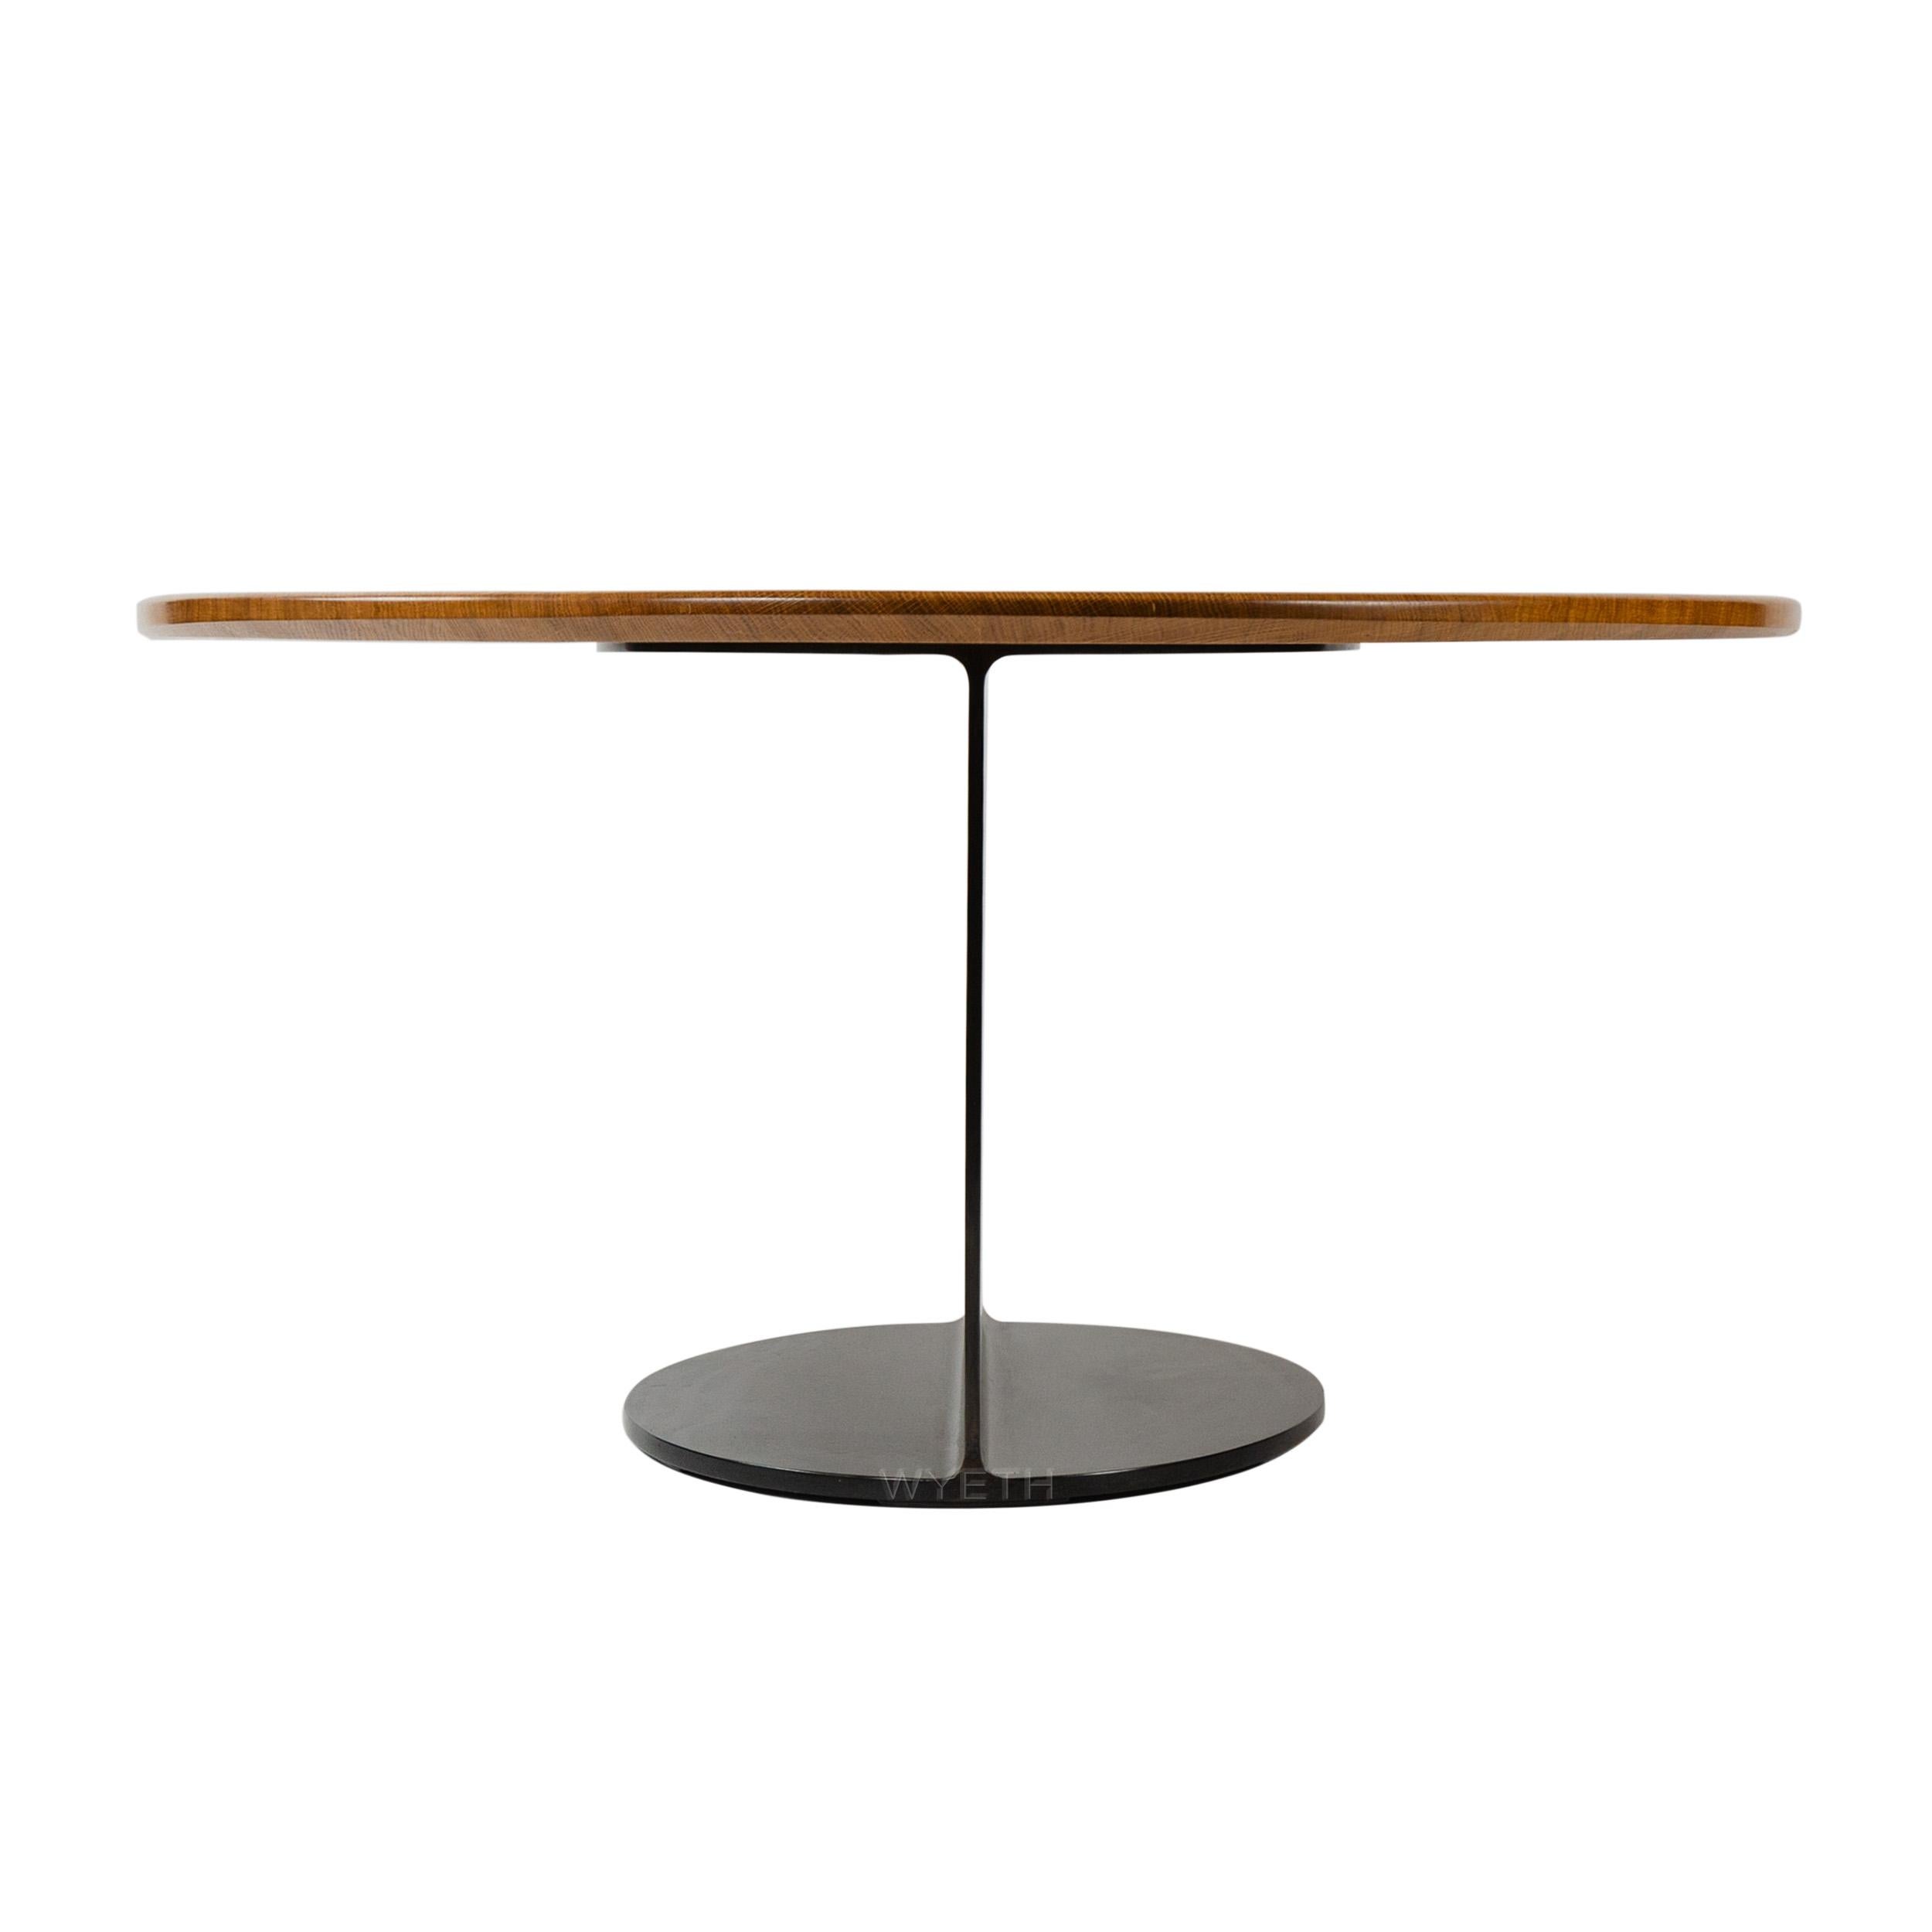 Wyeth Original Super Yacht Table in Oak and Blackened Steel In New Condition For Sale In Sagaponack, NY